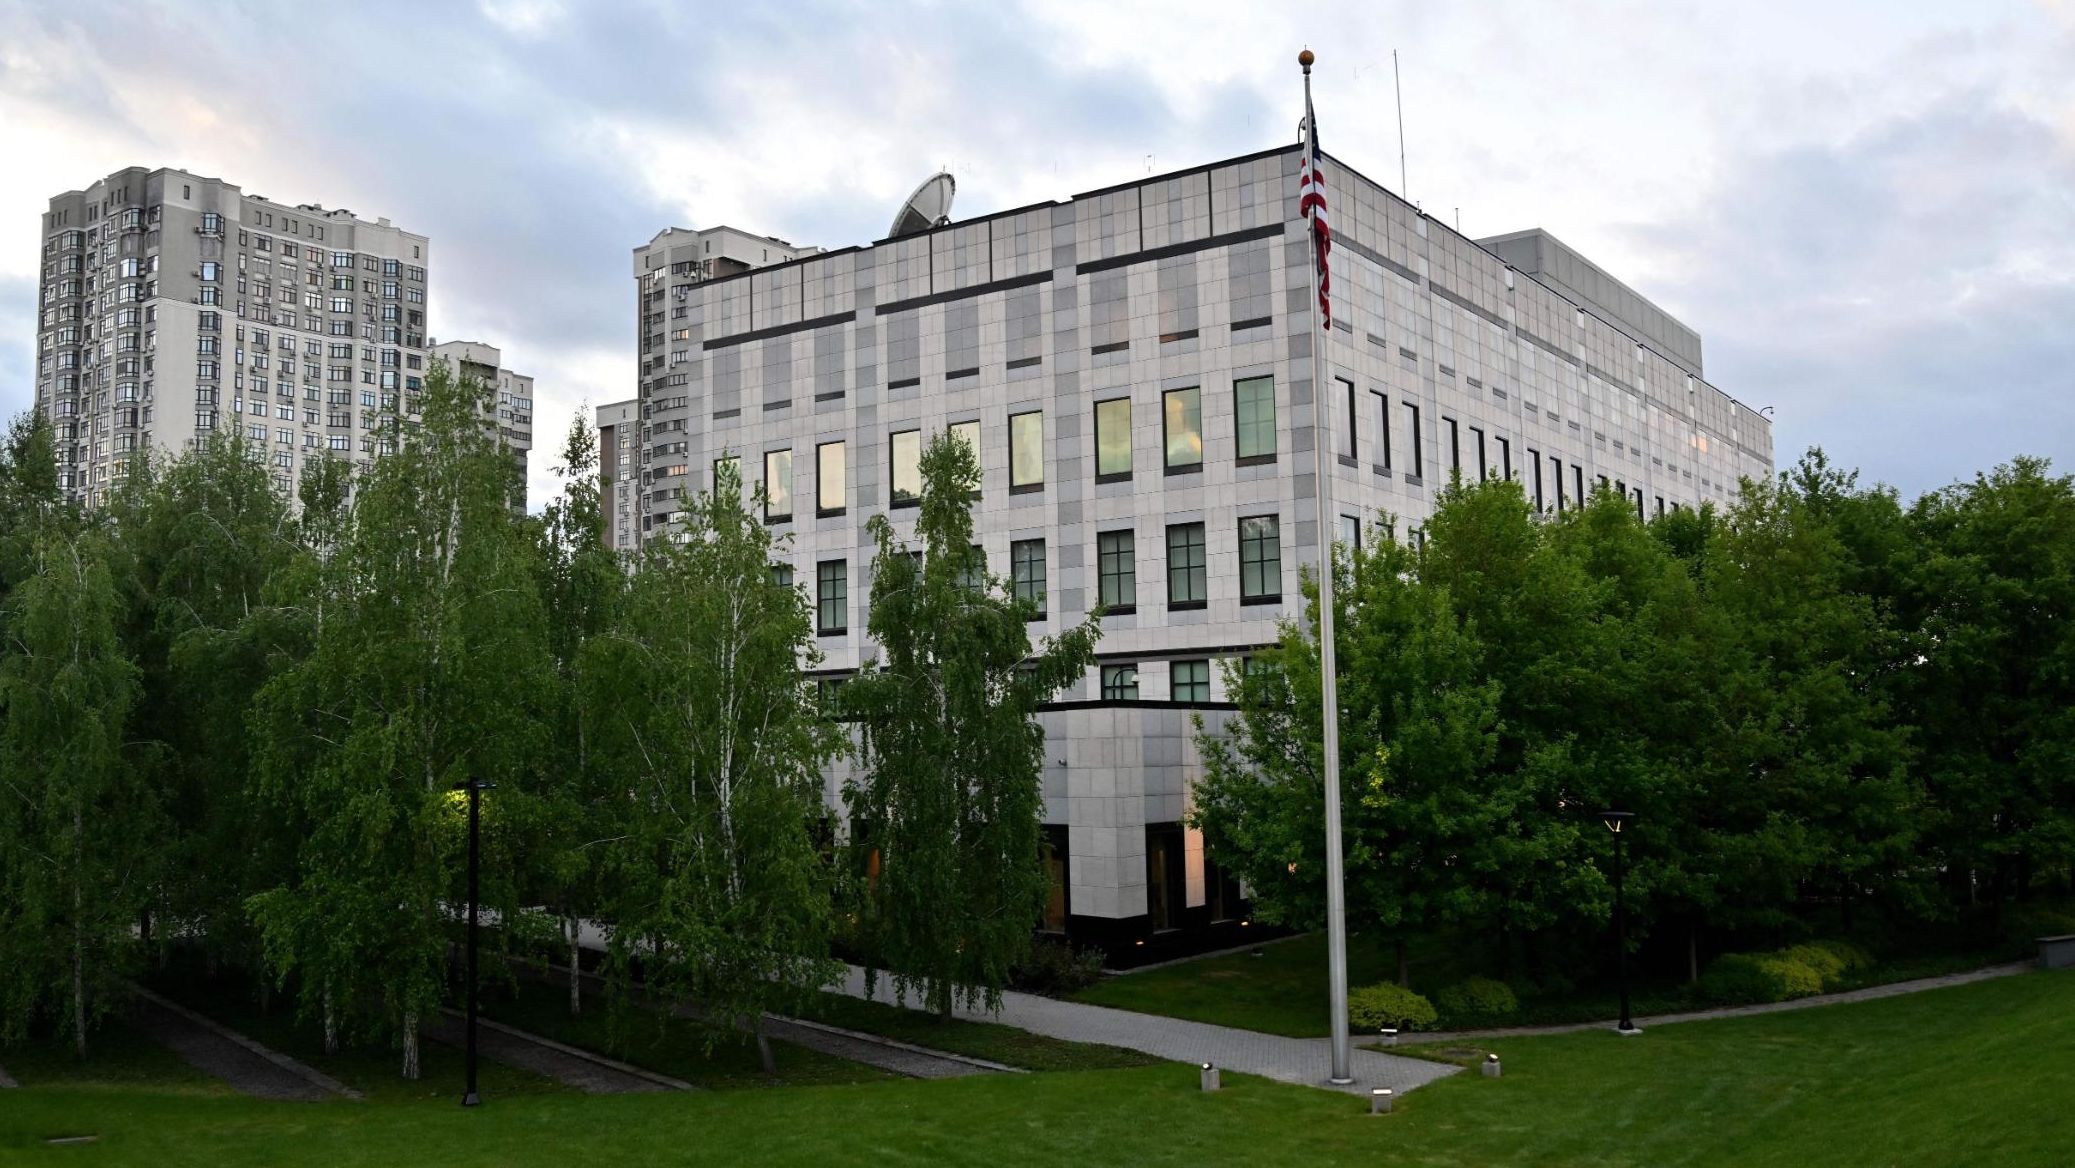 A picture shows a general view of the US embassy in Kyiv on May 18, 2022, as the embassy reopens after closing it for three months due to Russia's invasion.